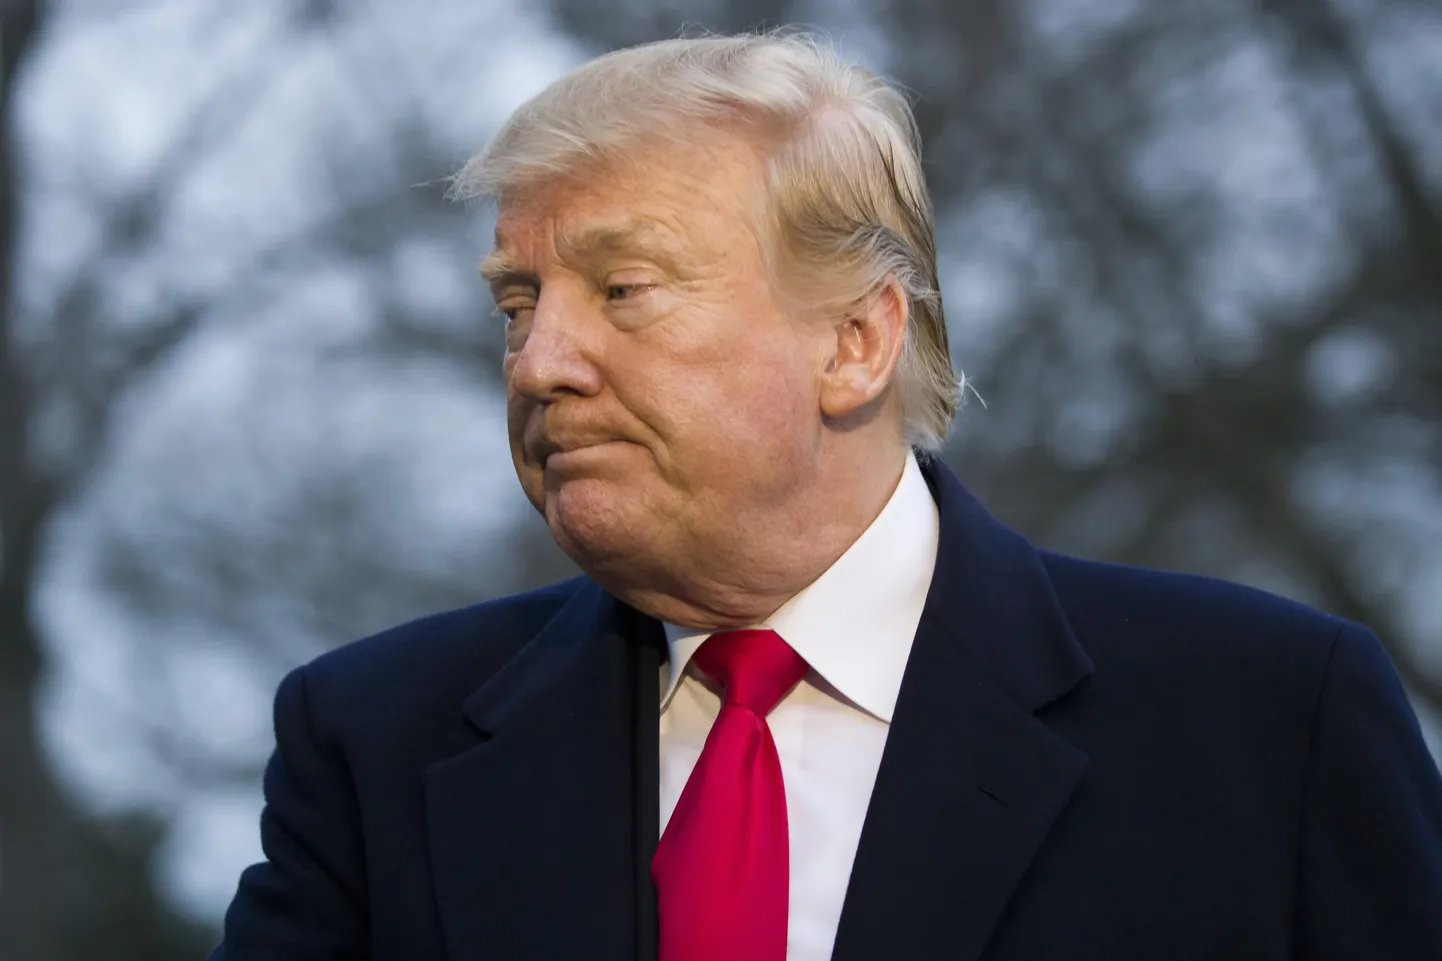 President Donald Trump turns to depart after speaking with the media after stepping off Marine One on the South Lawn of the White House, Sunday, March 24, 2019, in Washington. The Justice Department said Sunday that special counsel Robert Mueller's investigation did not find evidence that President Donald Trump's campaign "conspired or coordinated" with Russia to influence the 2016 presidential election. (AP Photo/Alex Brandon)